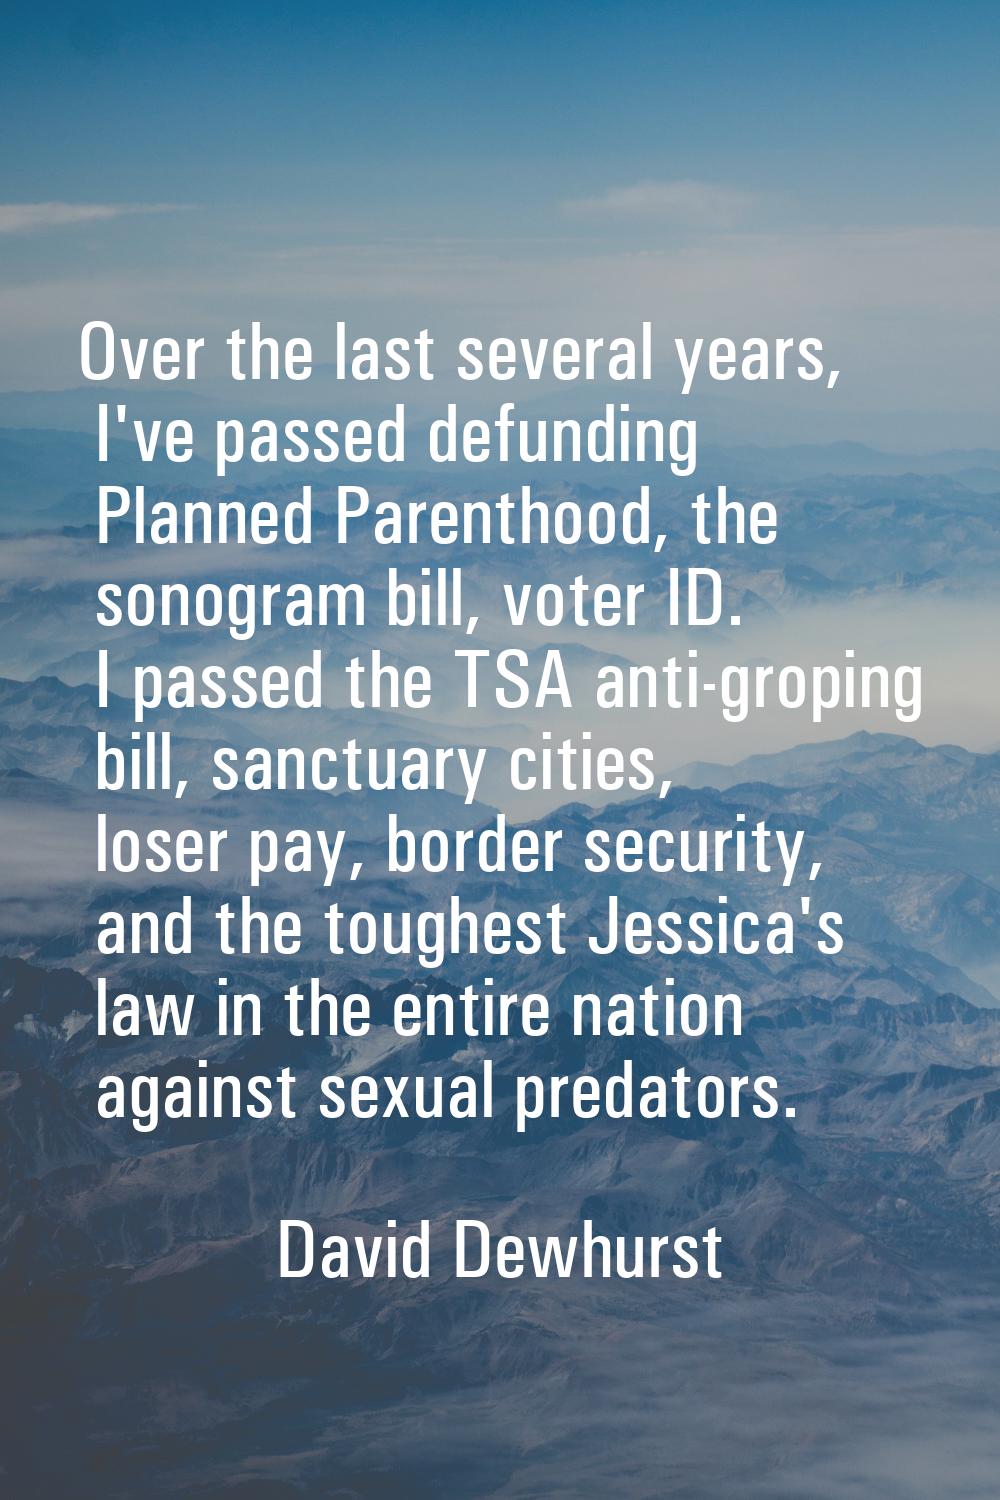 Over the last several years, I've passed defunding Planned Parenthood, the sonogram bill, voter ID.